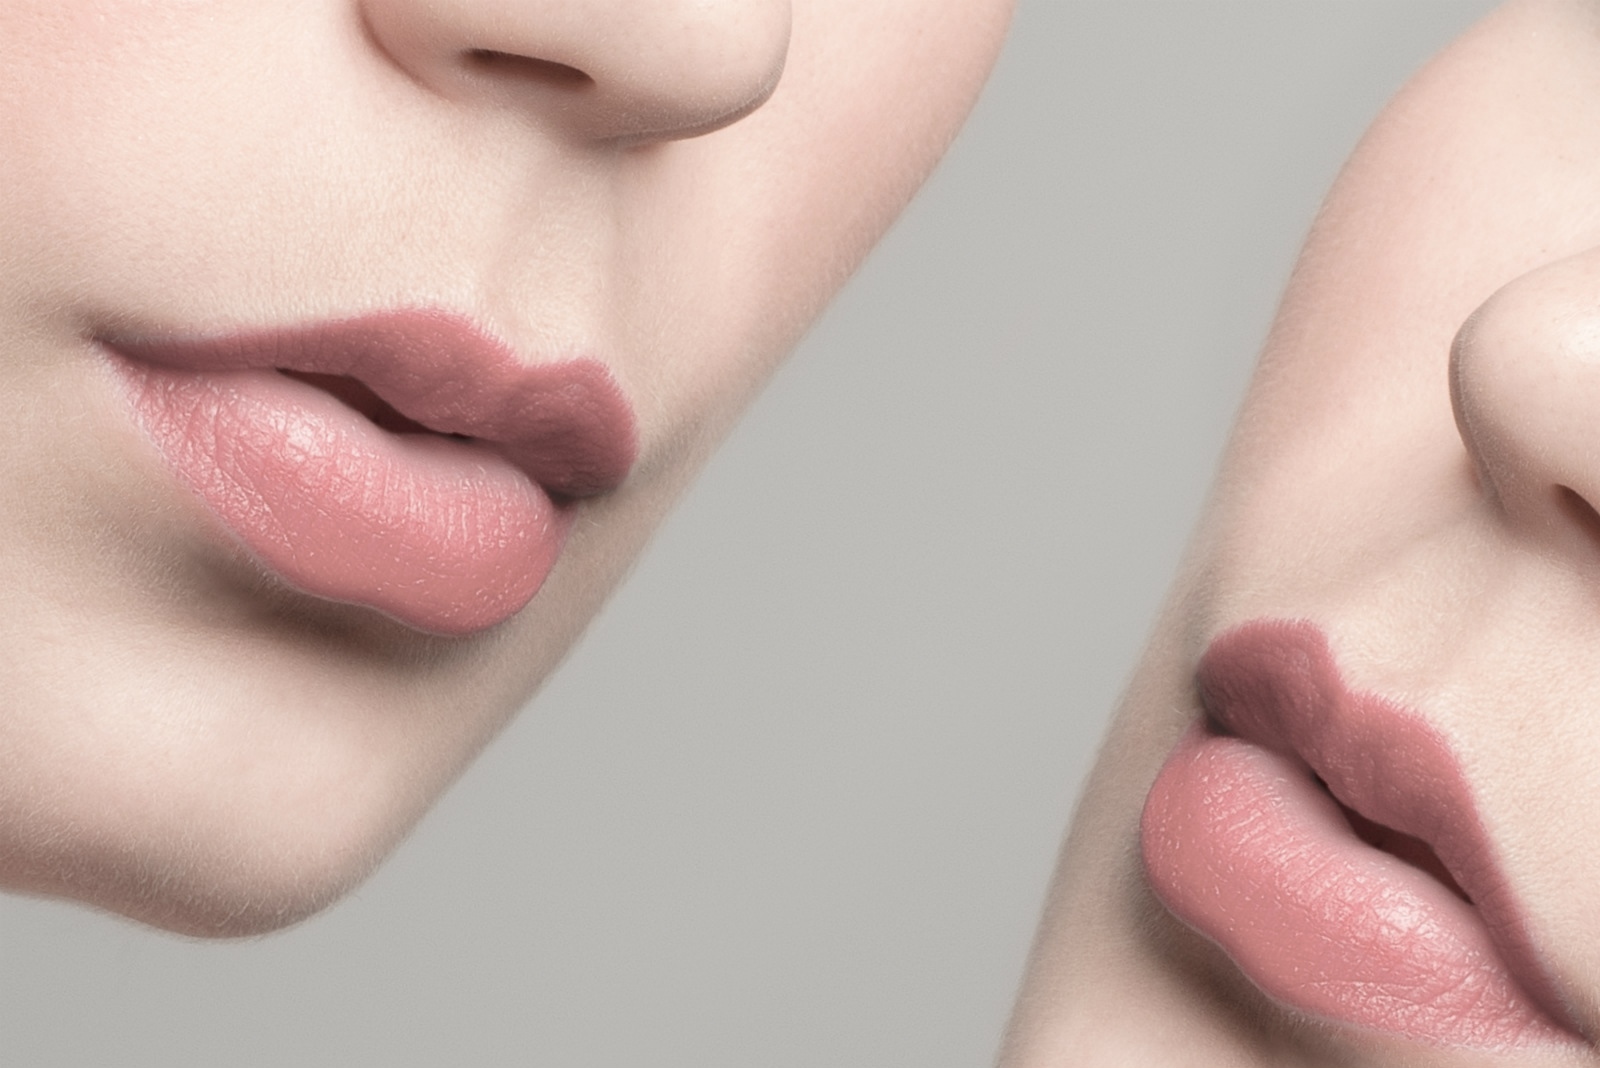 Lip Injections are the New Botulinum Toxin